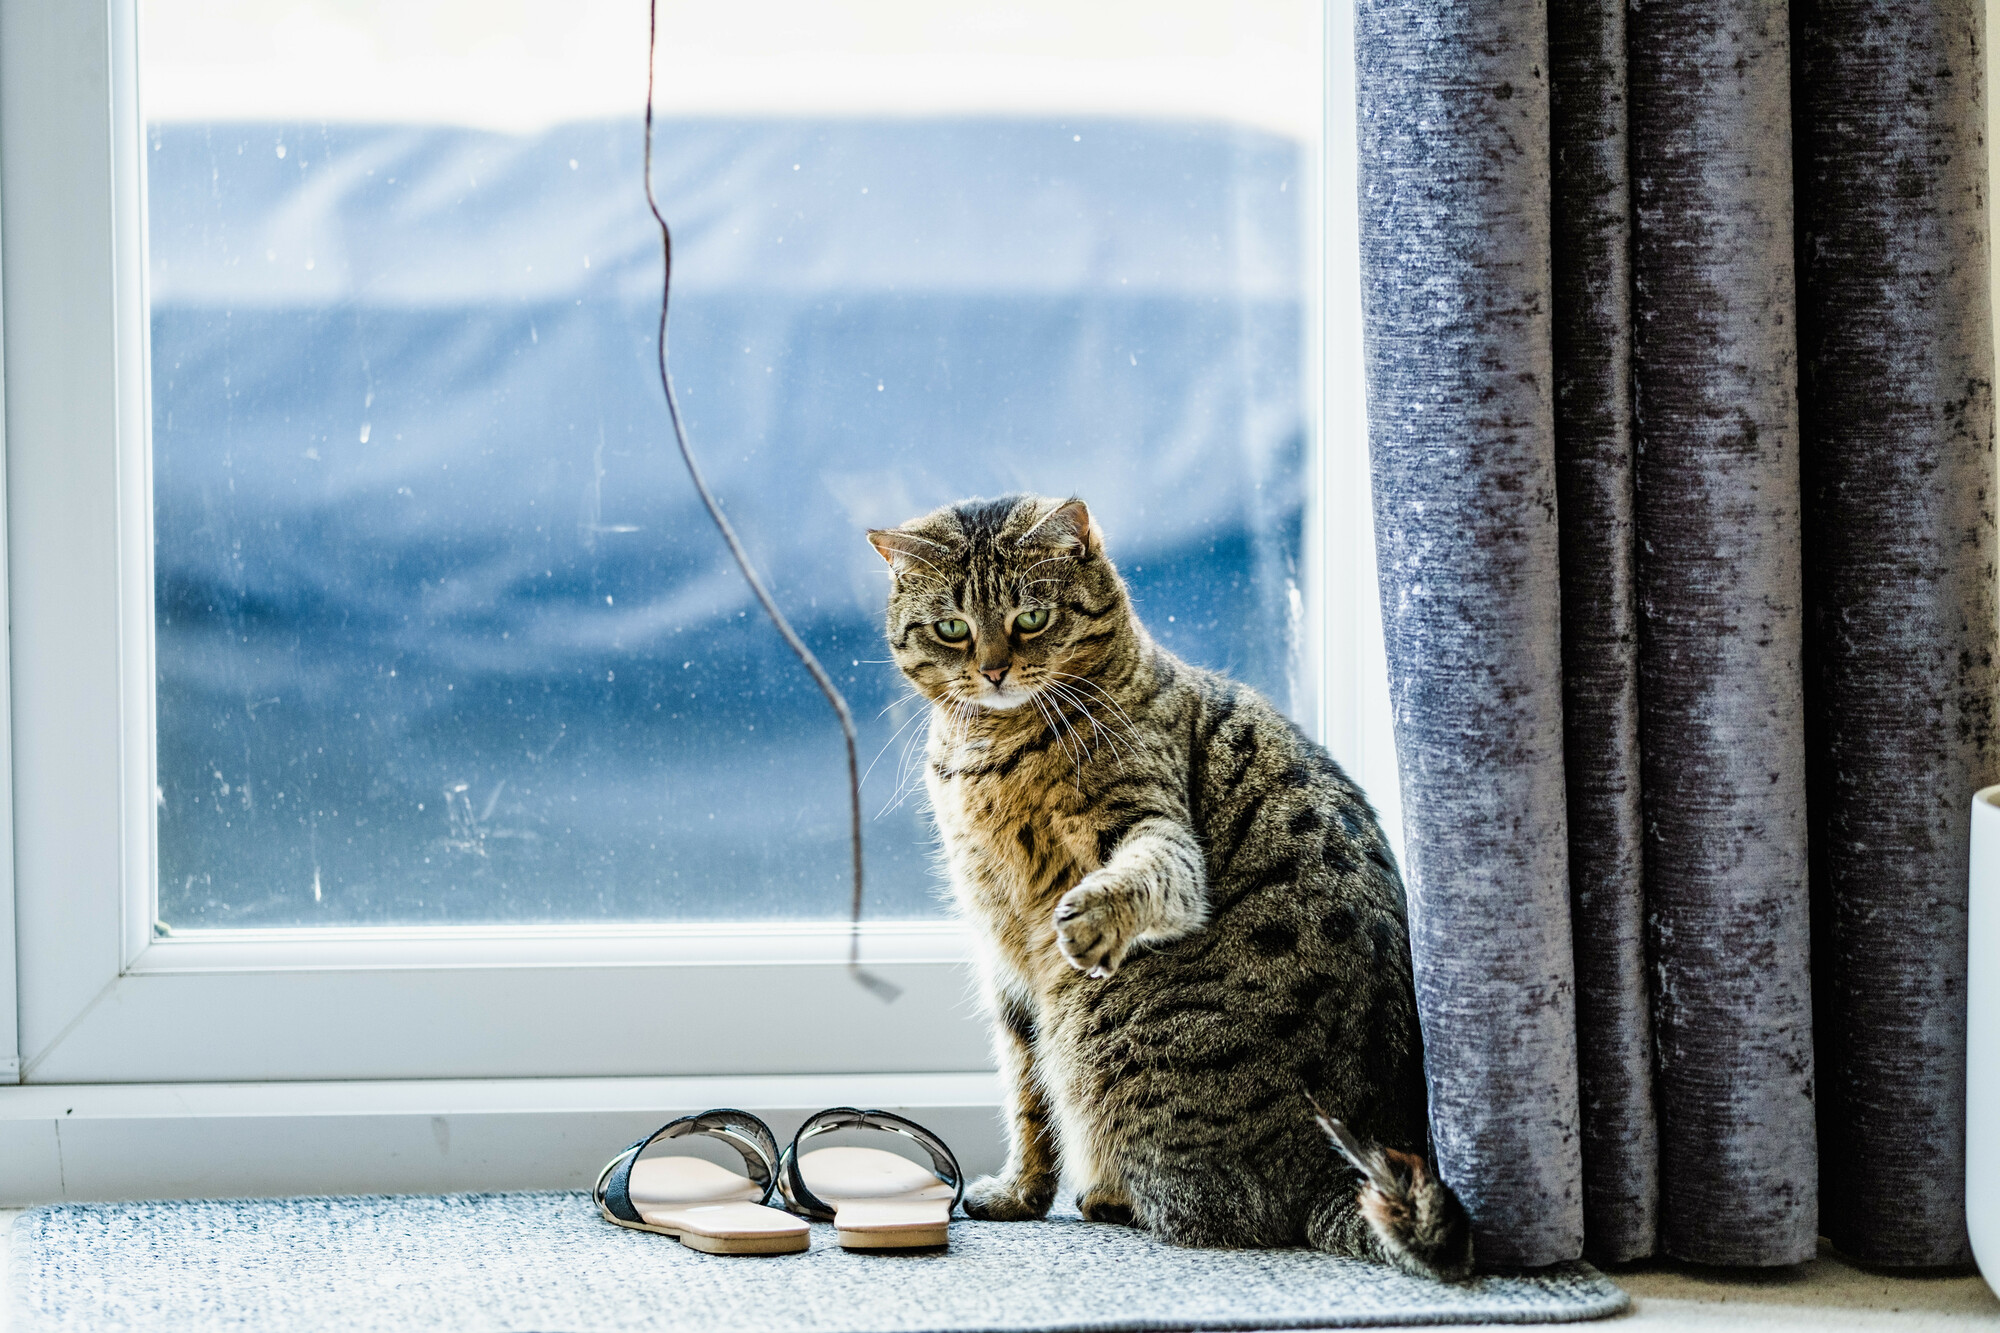 A tabby cat sits by a window and plays with a cat toy.